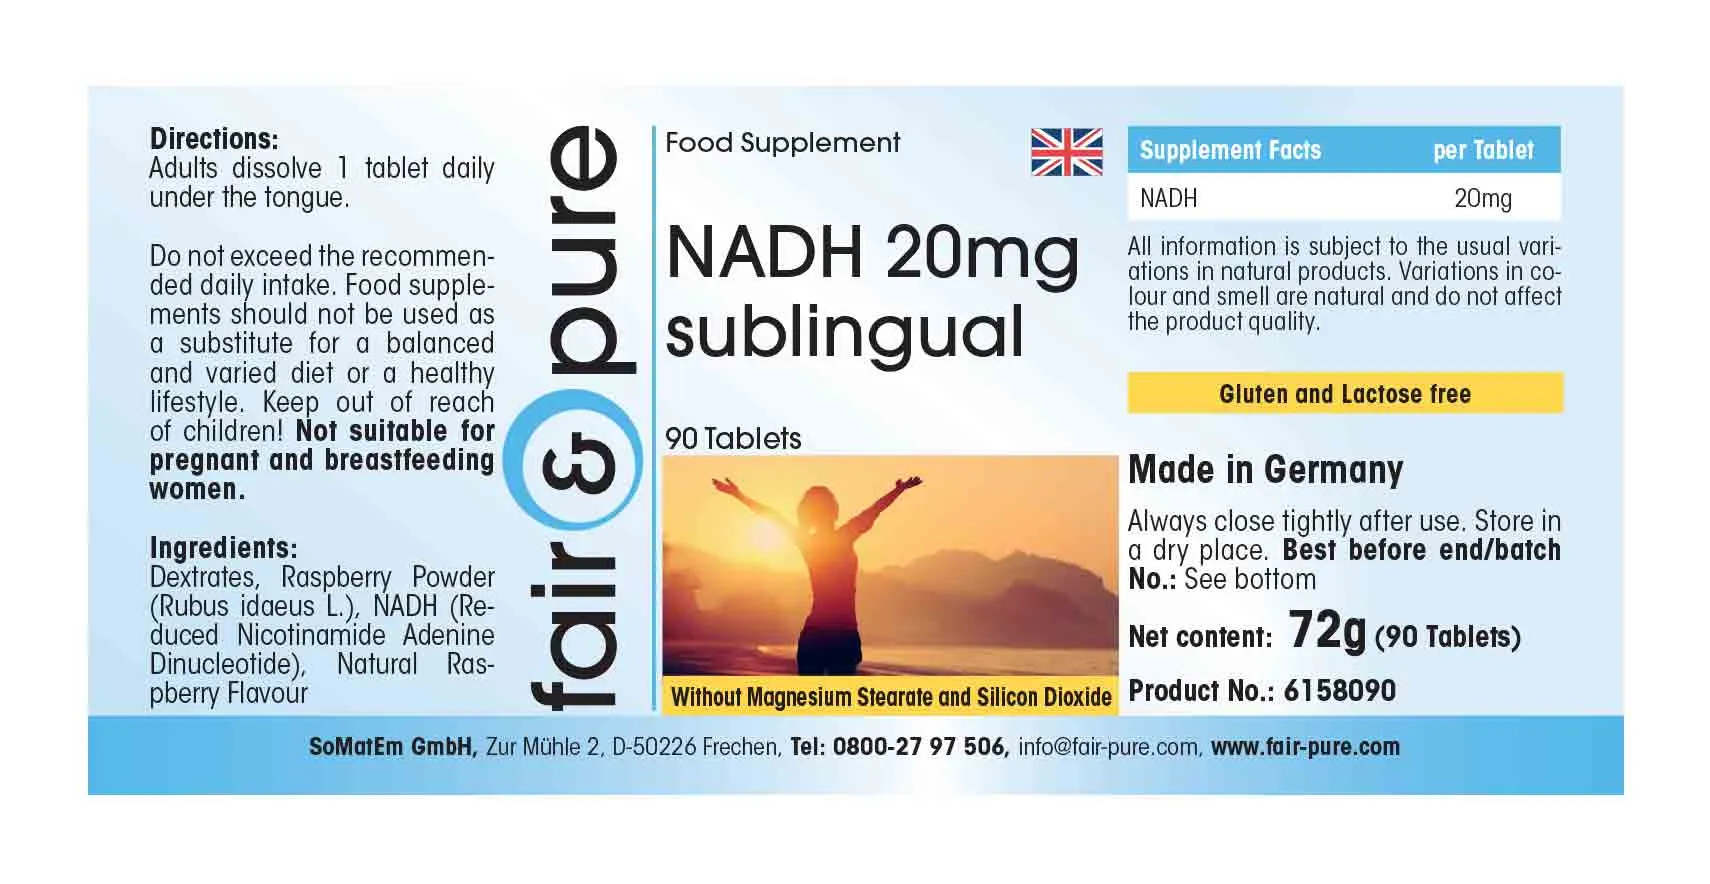 NADH 20mg sublinguale